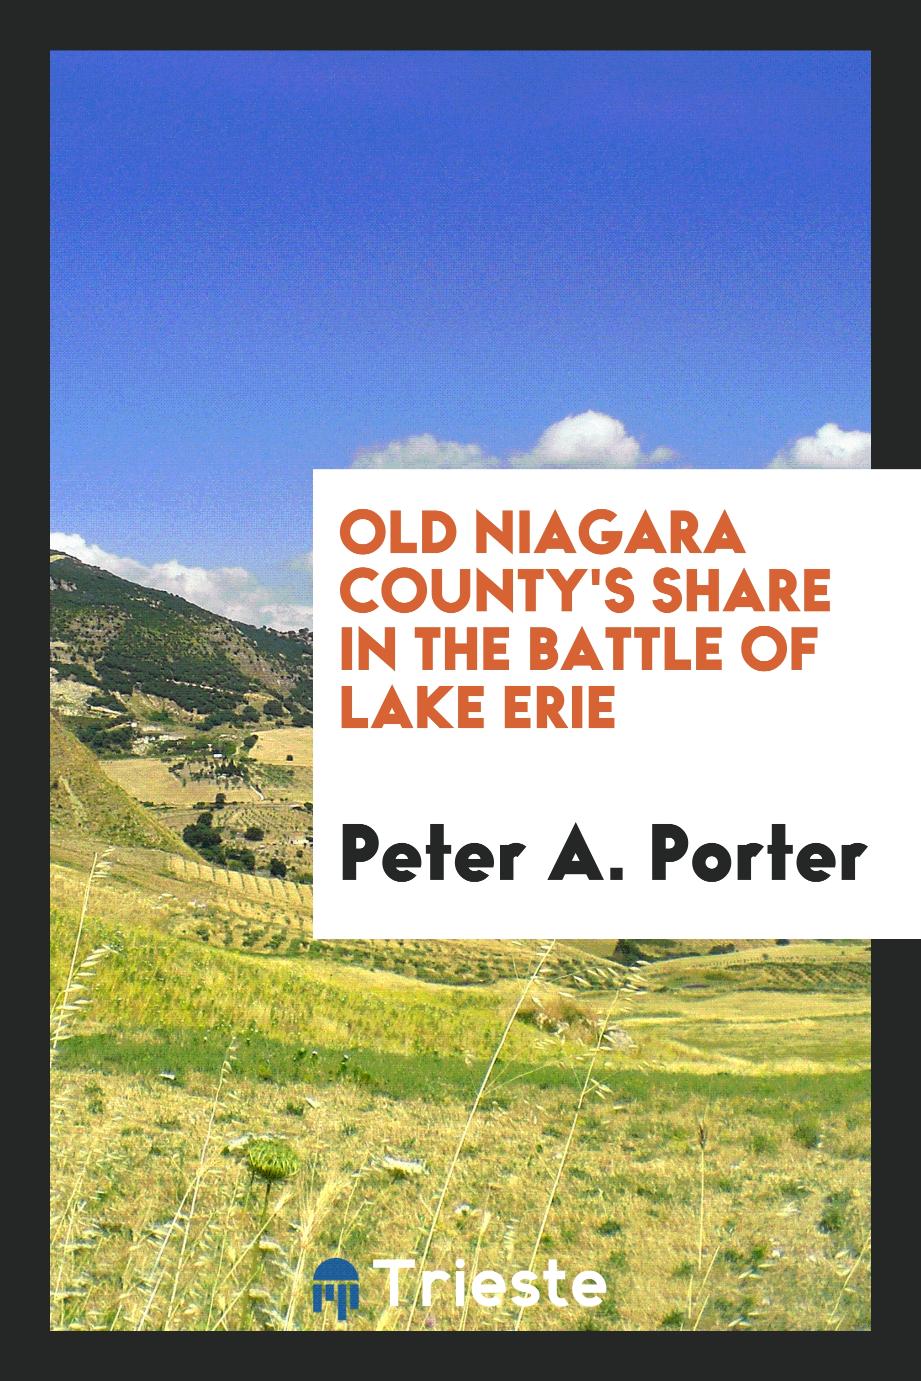 Old Niagara County's Share in the Battle of Lake Erie